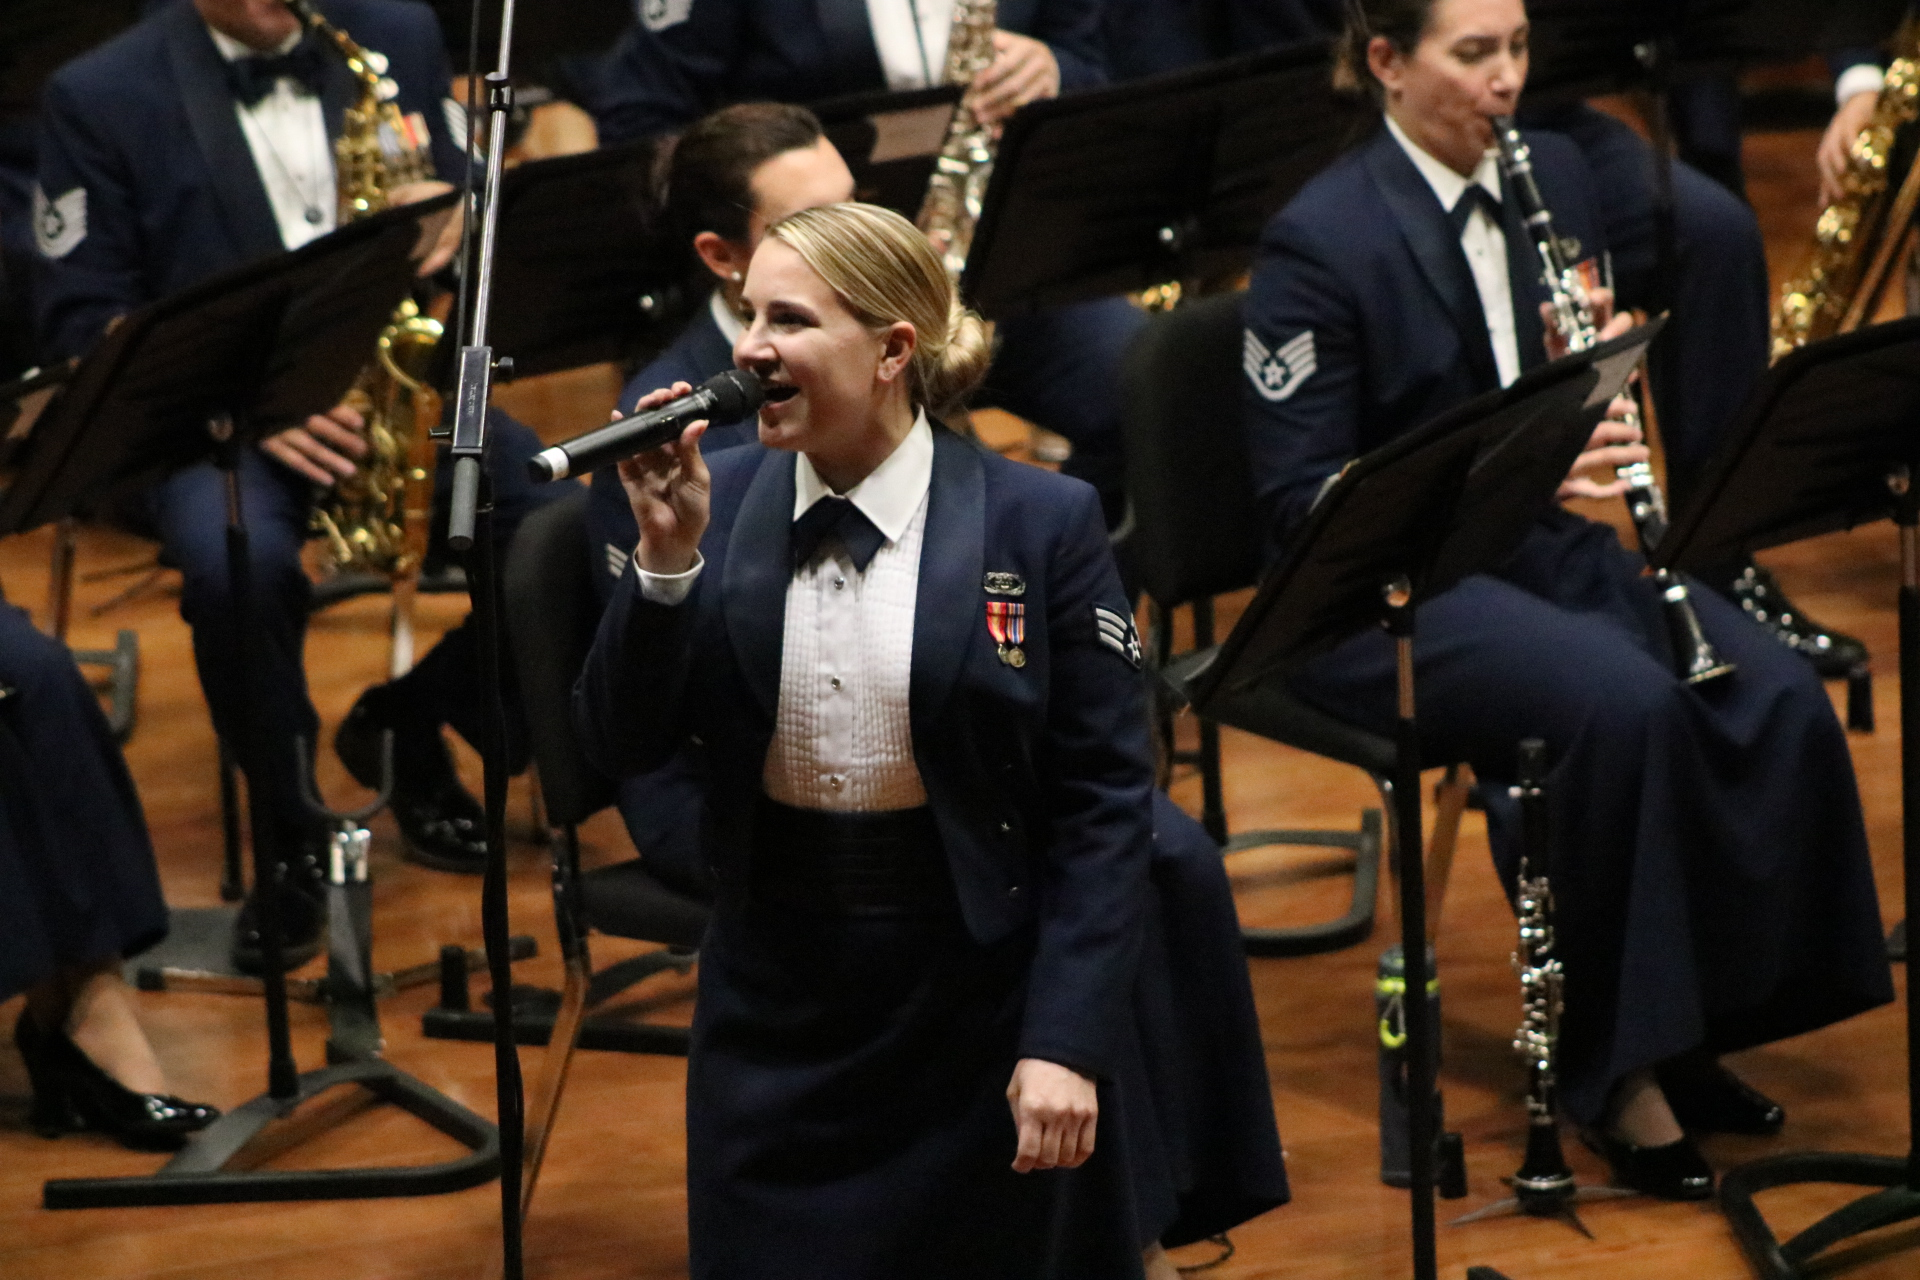 The U.S. Air Force Band of the Golden West will bring a wide variety of music to the Atherton Auditorium stage at San Joaquin Delta College.